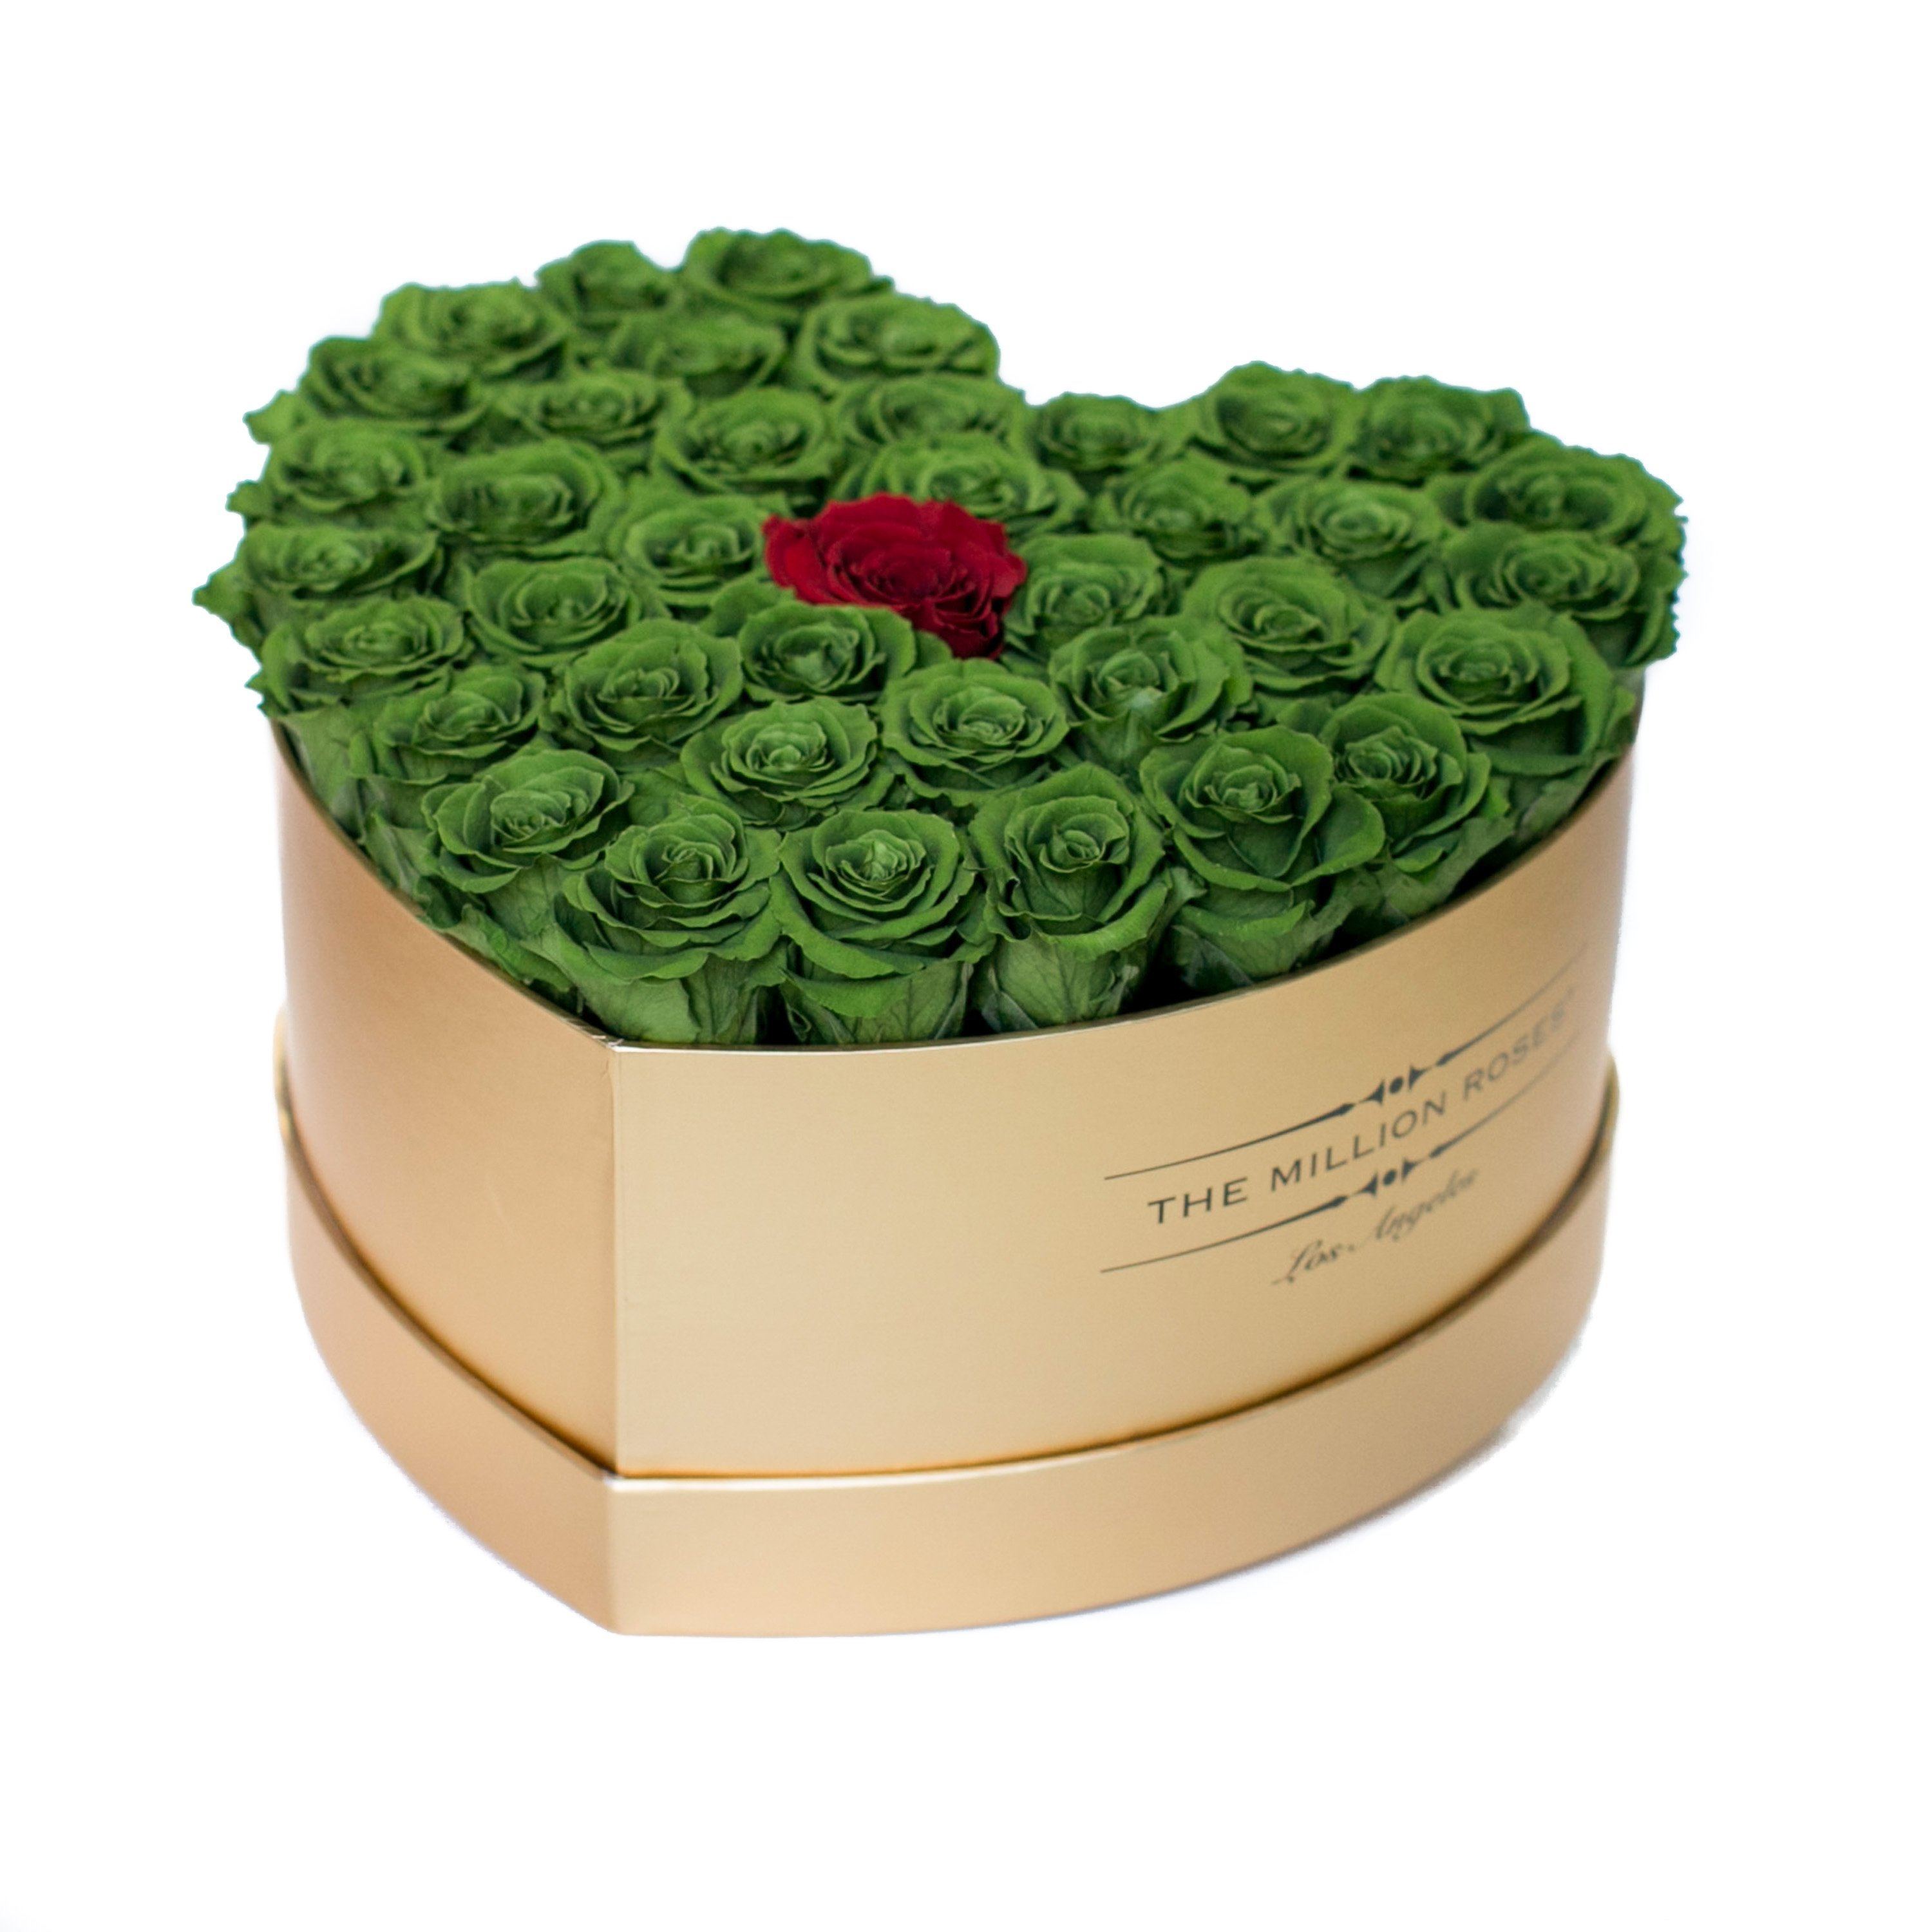 LOVE box - gold - emerald-green&red roses red eternity roses - the million roses